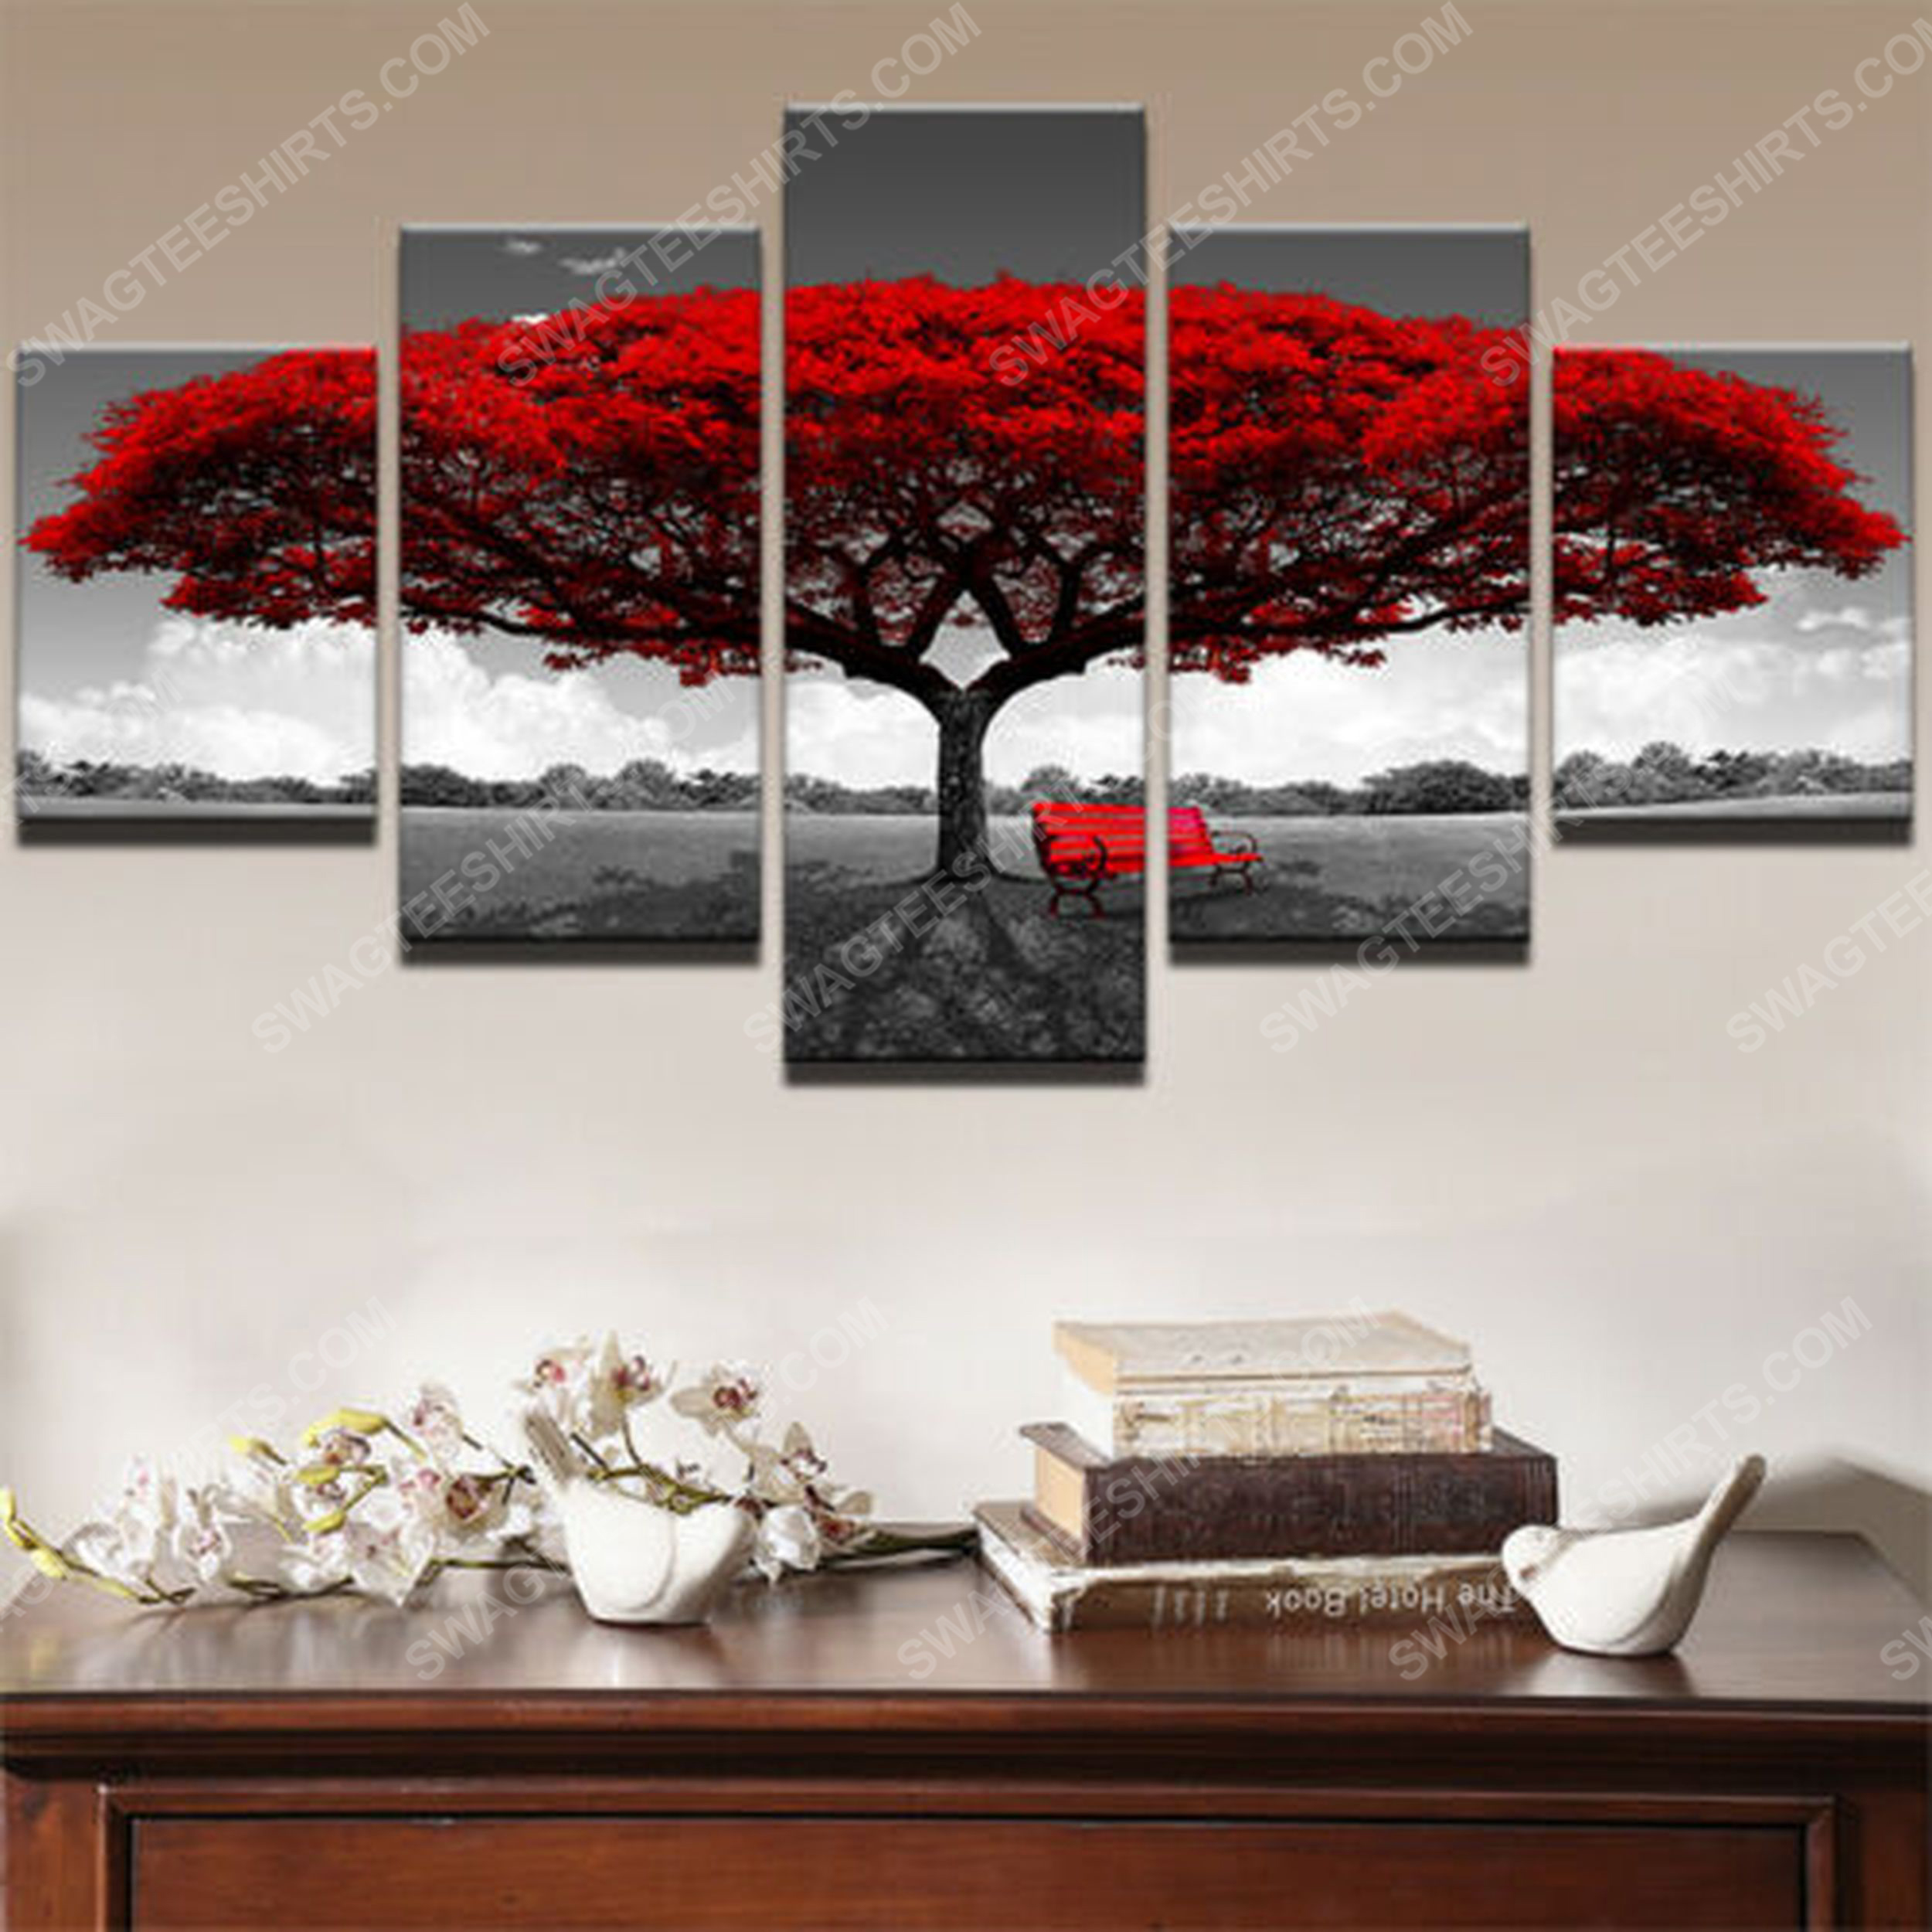 Red tree chair landscape print painting canvas wall art home decor